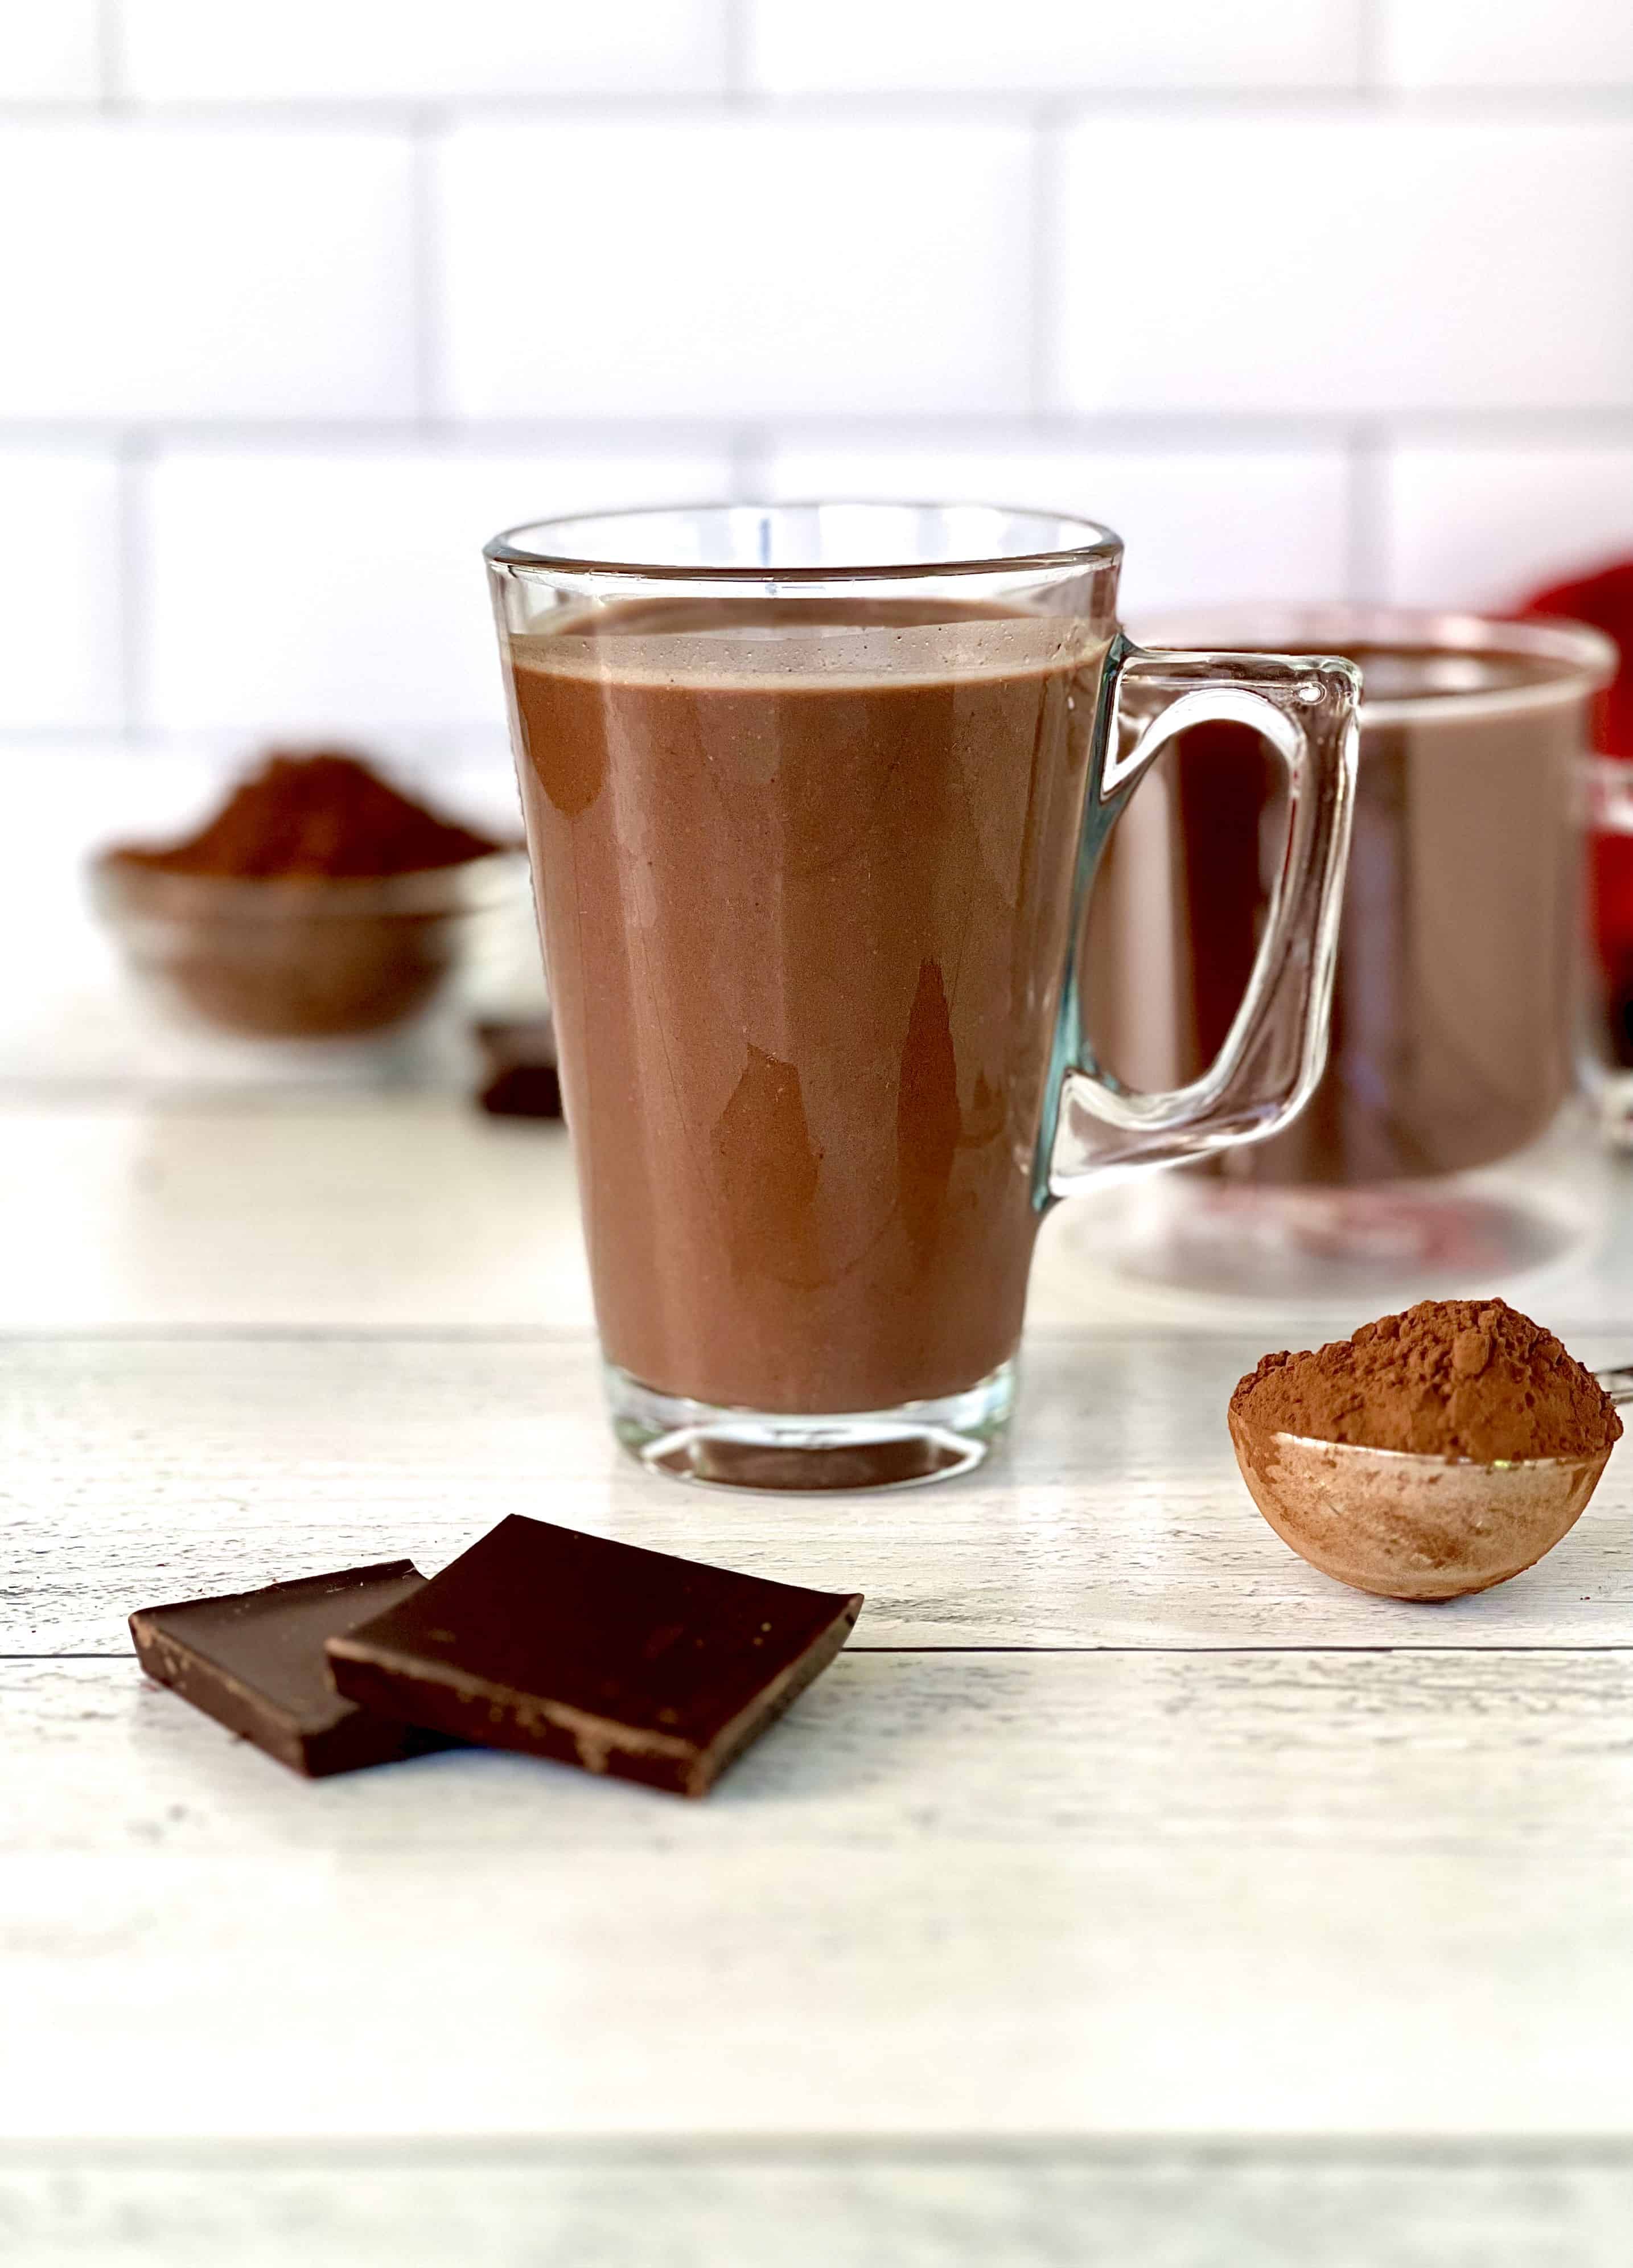 Hot cocoa in a glass mug with a glass mug of sipping chocolate in the background